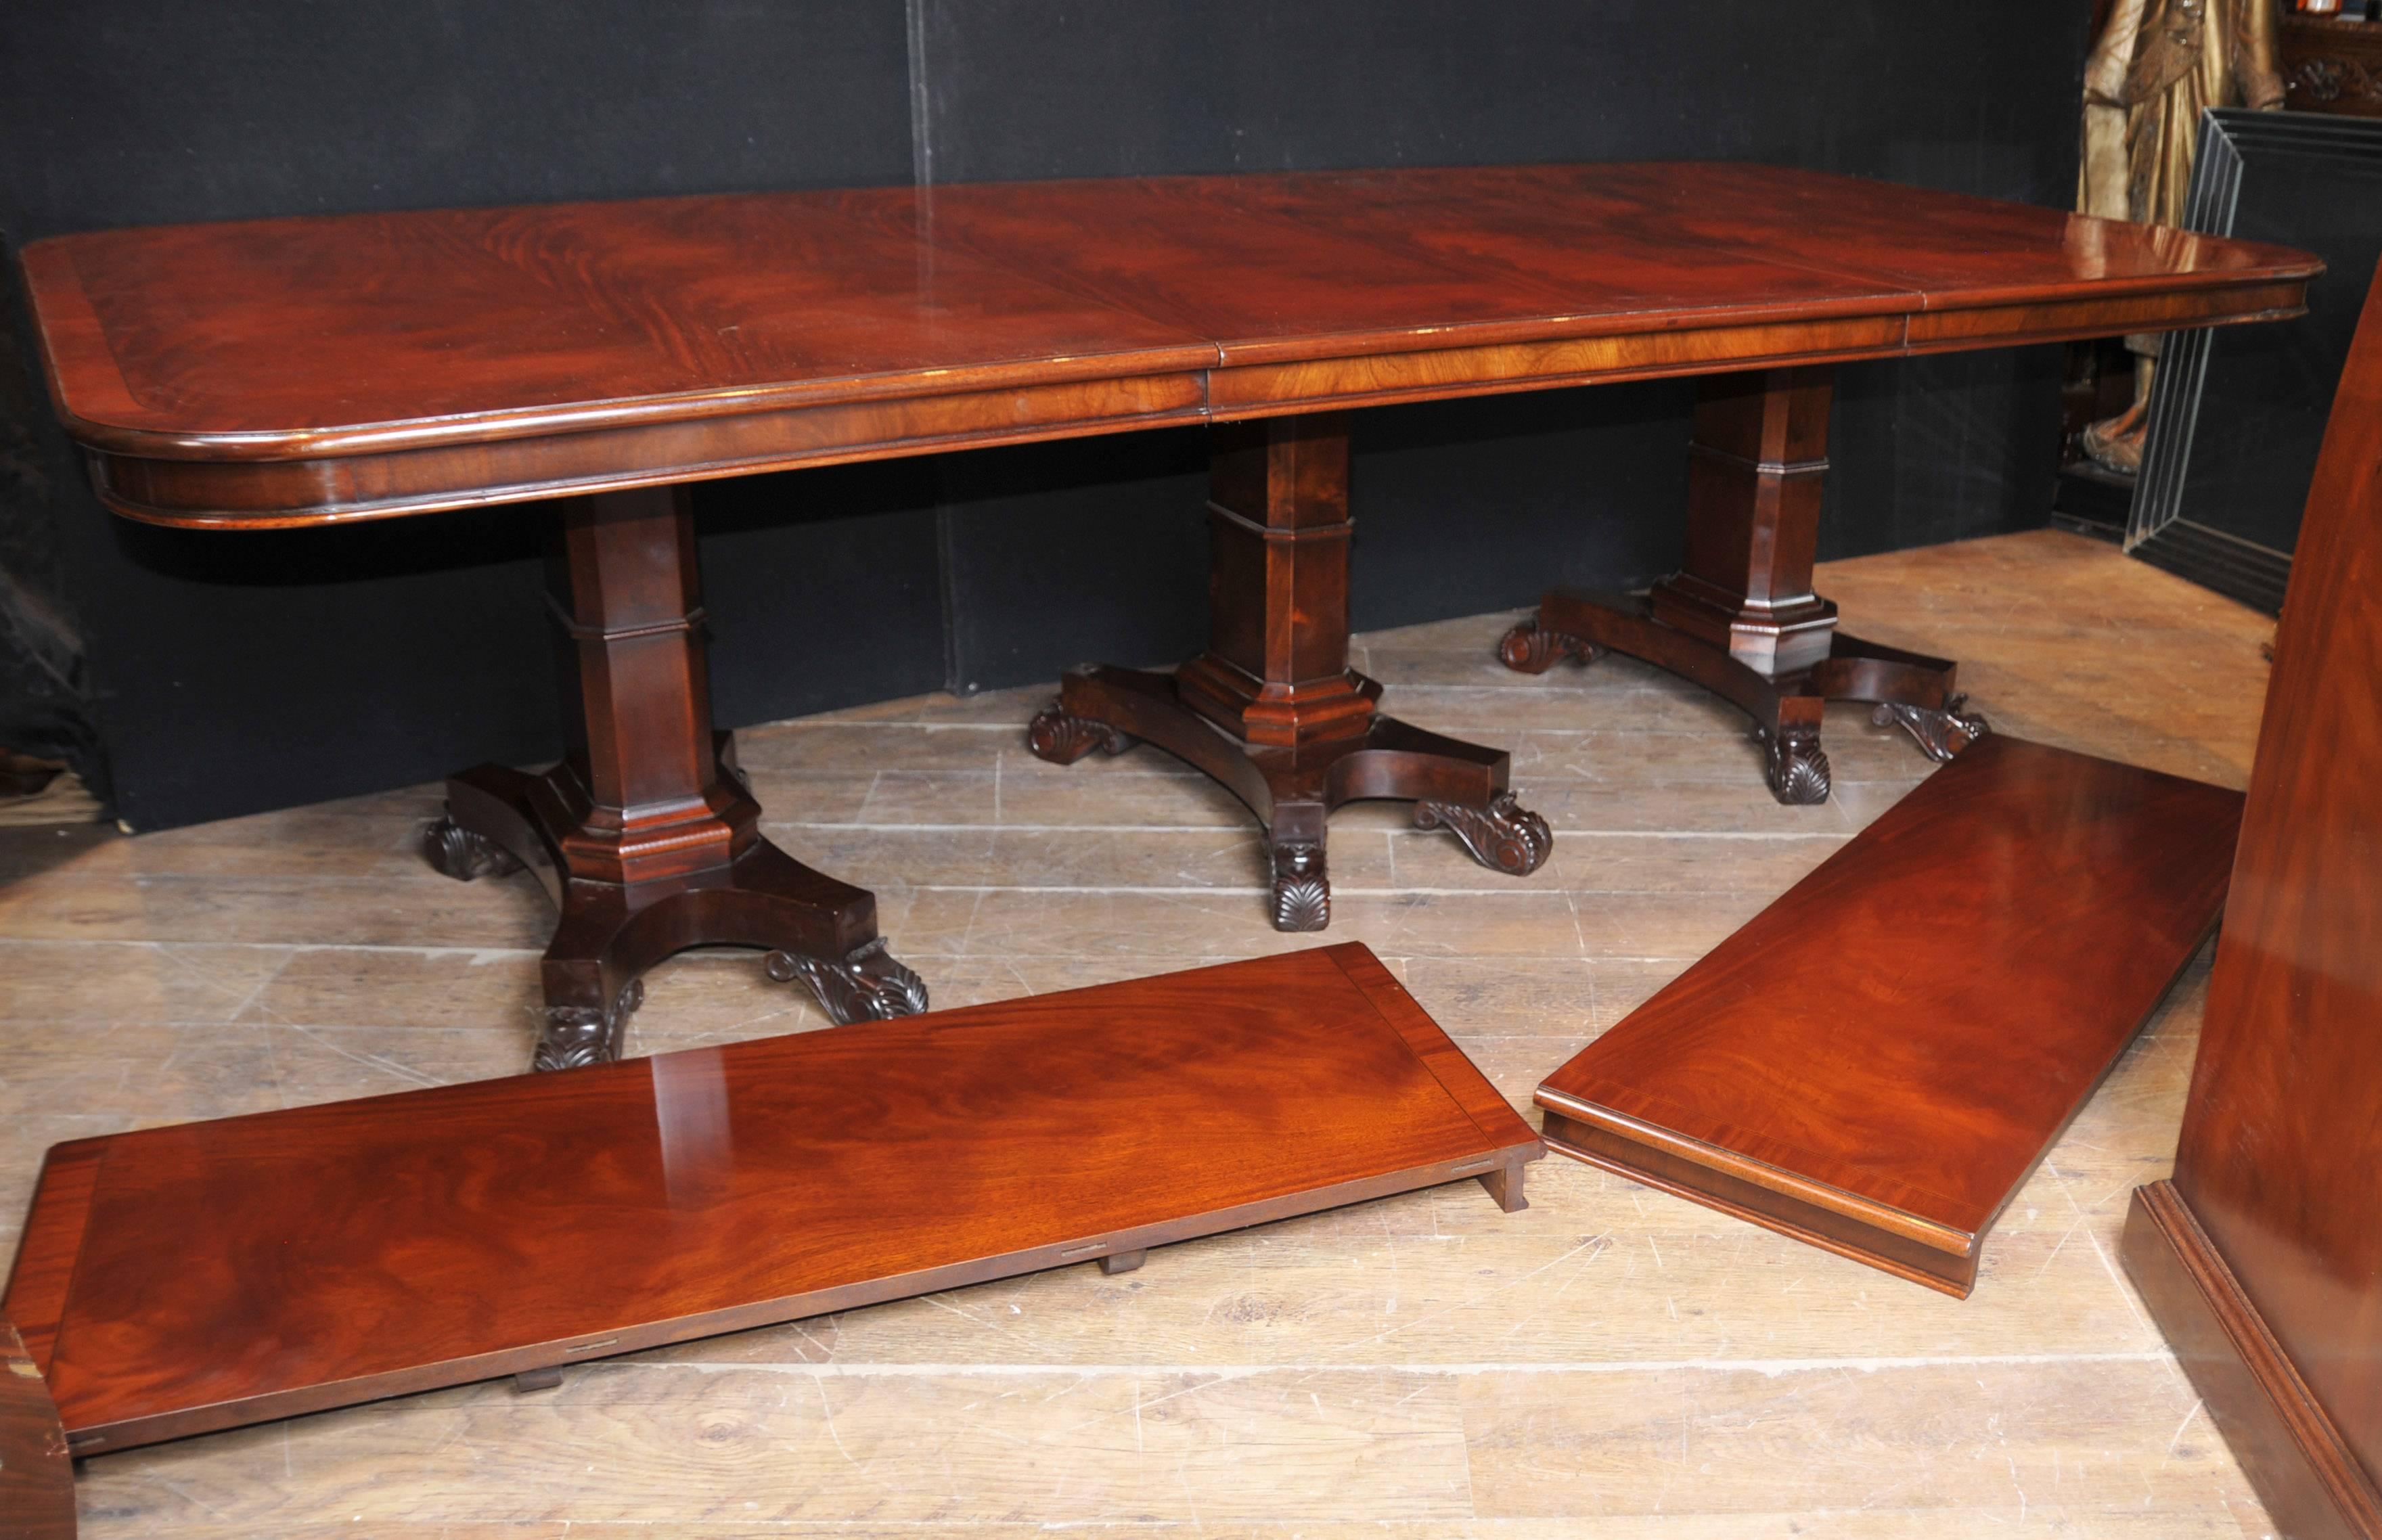 Regency Style Dining Table Mahogany Triple Pedestal Manner George Bullock In Good Condition For Sale In Potters Bar, Herts